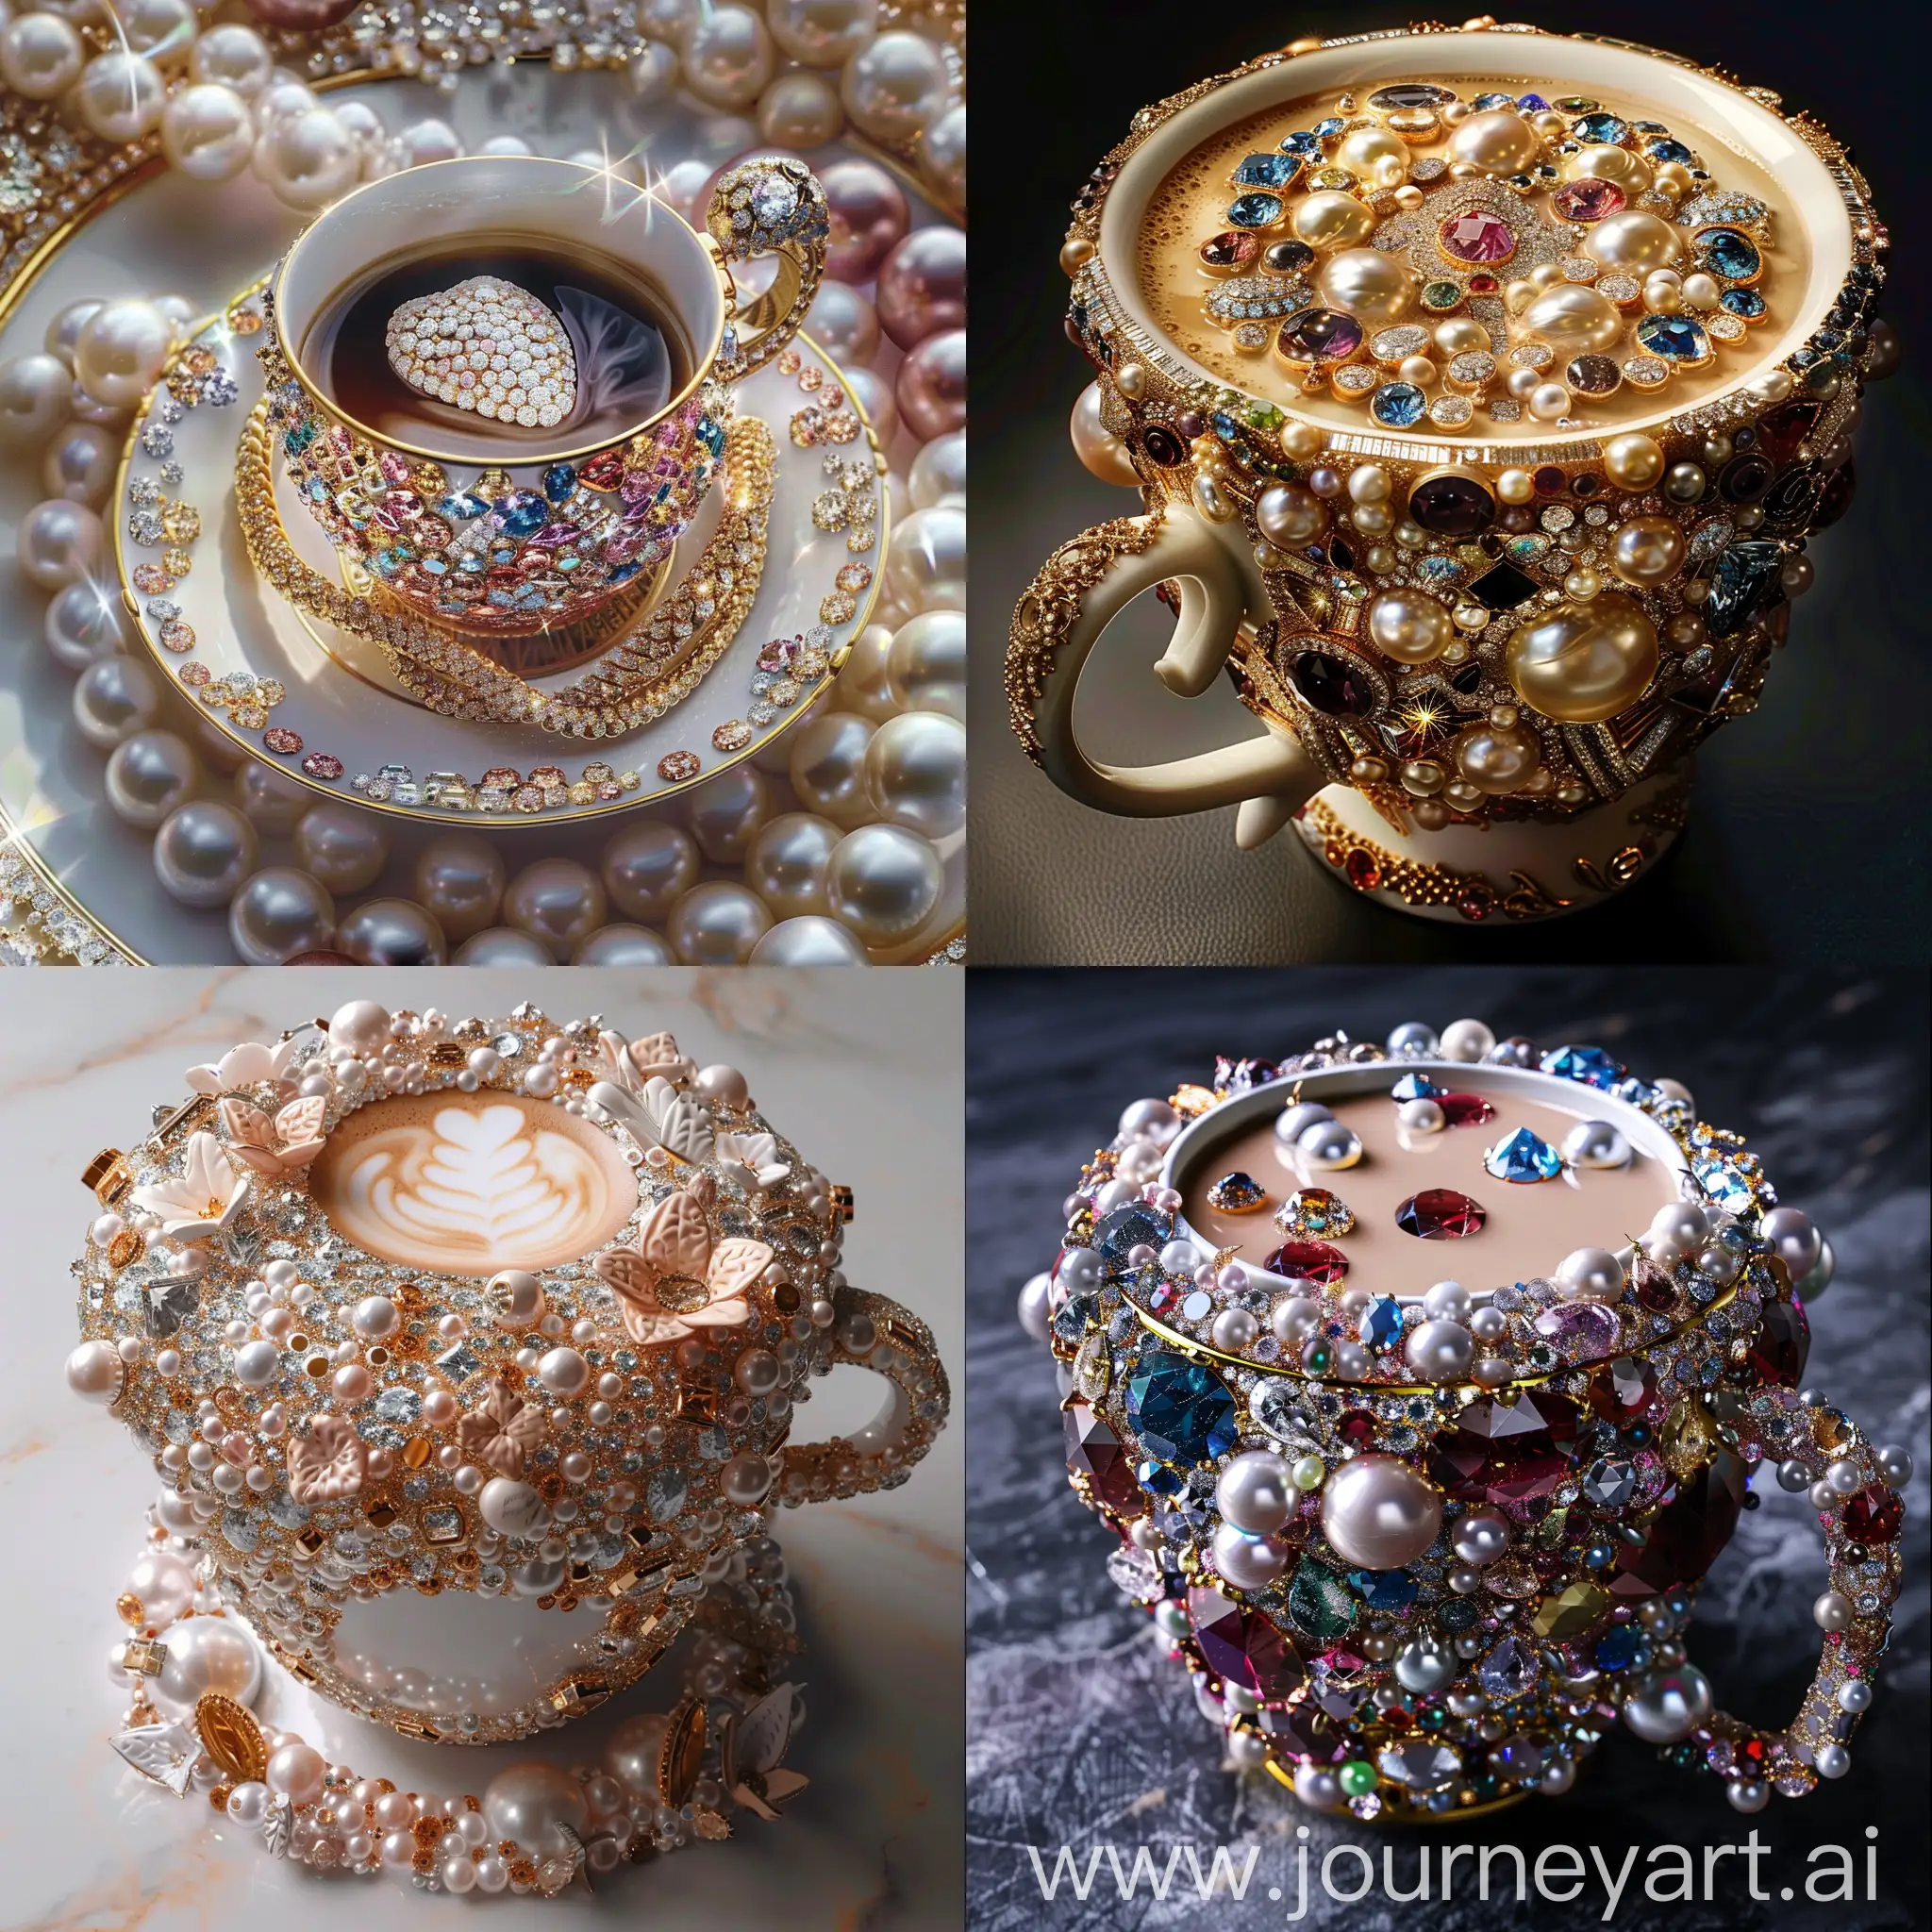 a cup of coffee with jewels, pearls and diamonds, in the style of iconic works of art history, colorized, yankeecore, i can't believe how beautiful this is, gemstone, oversized objects, sabattier effect